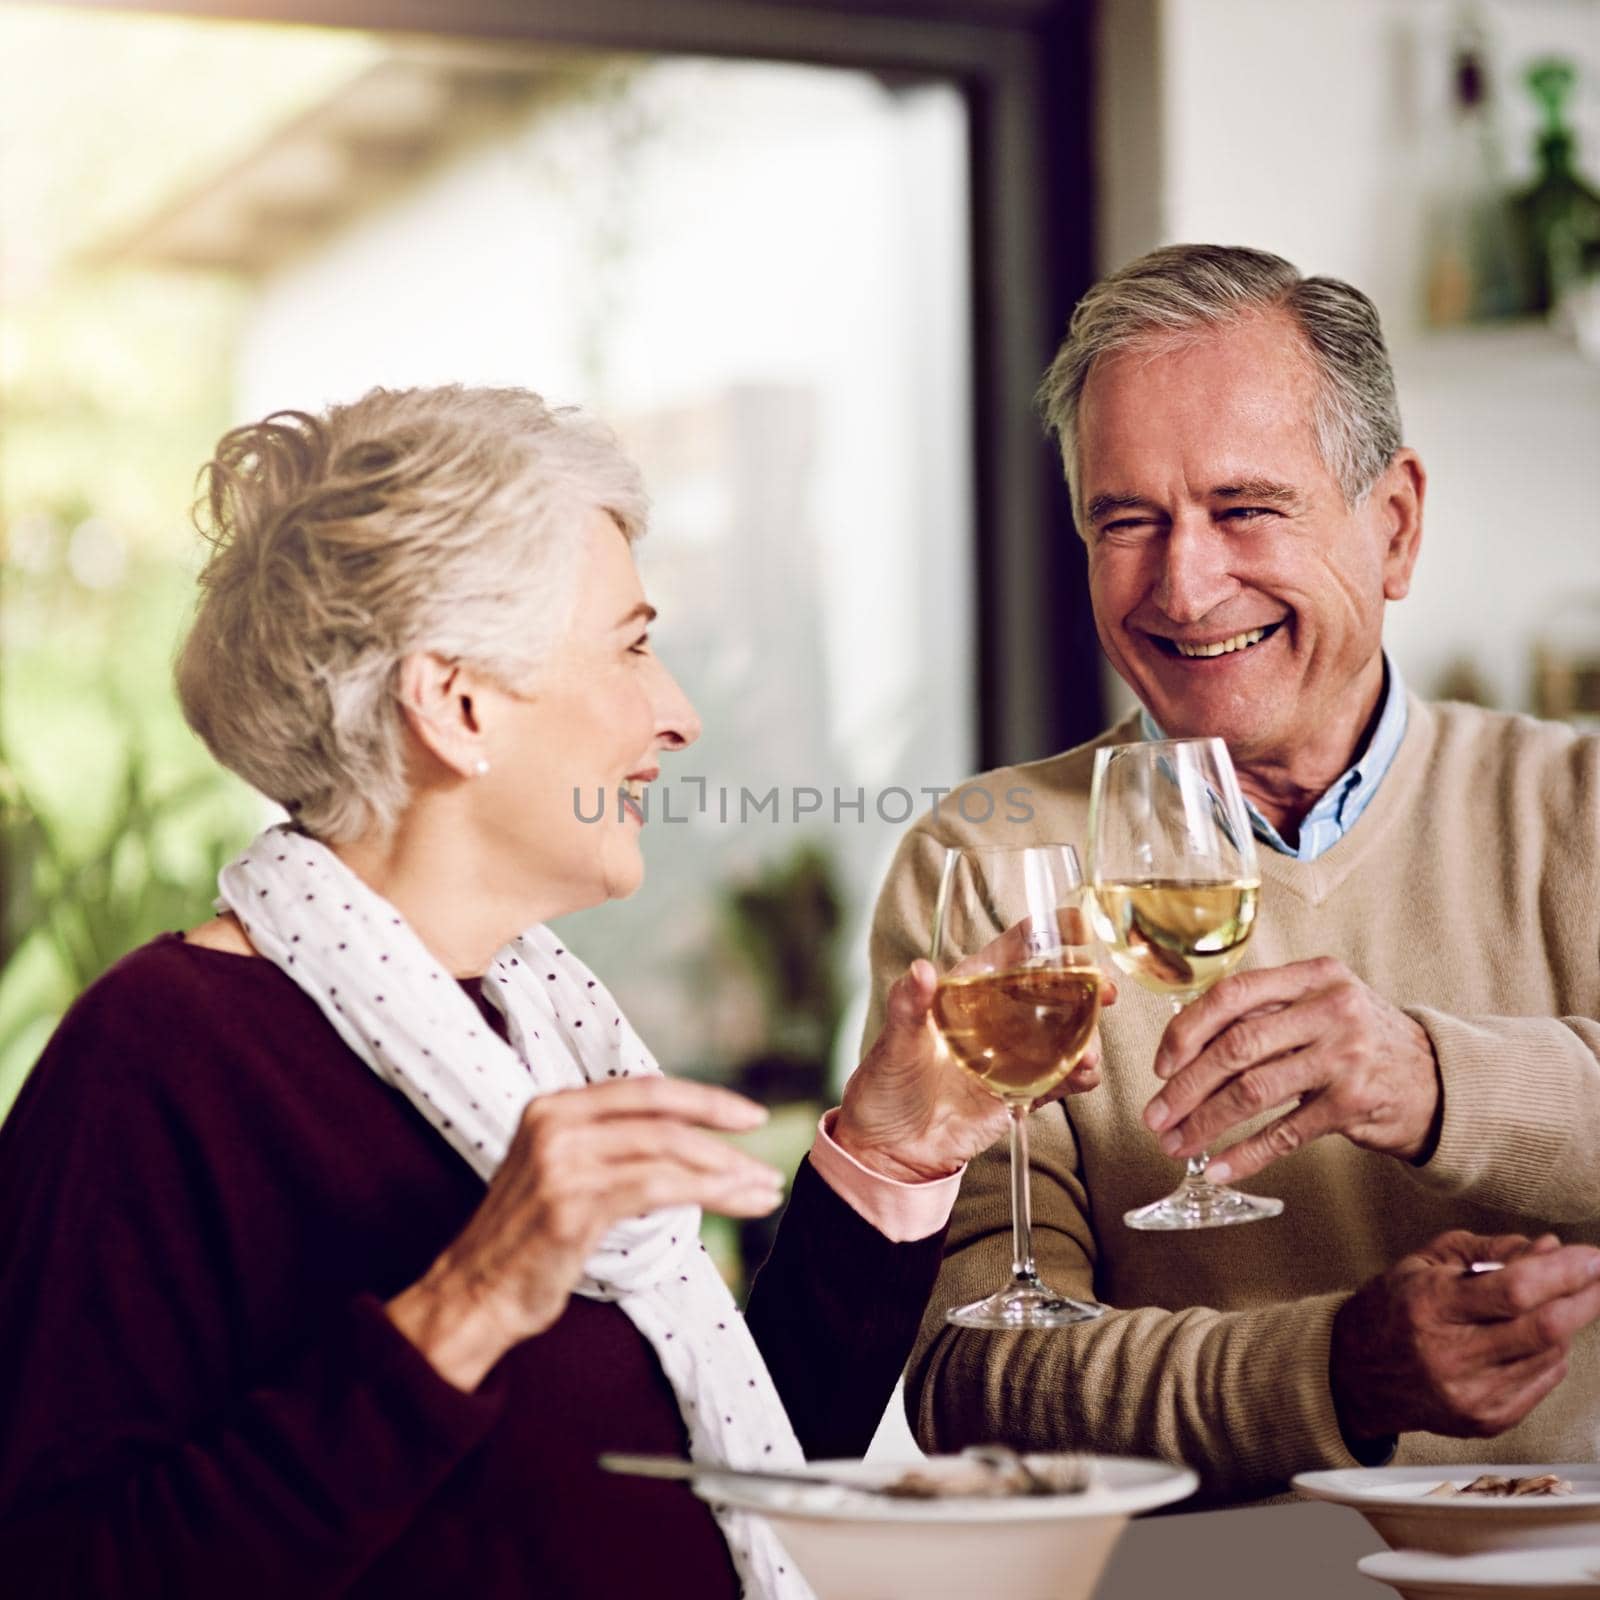 Shot of an elderly couple enjoying a meal and wine together at home.